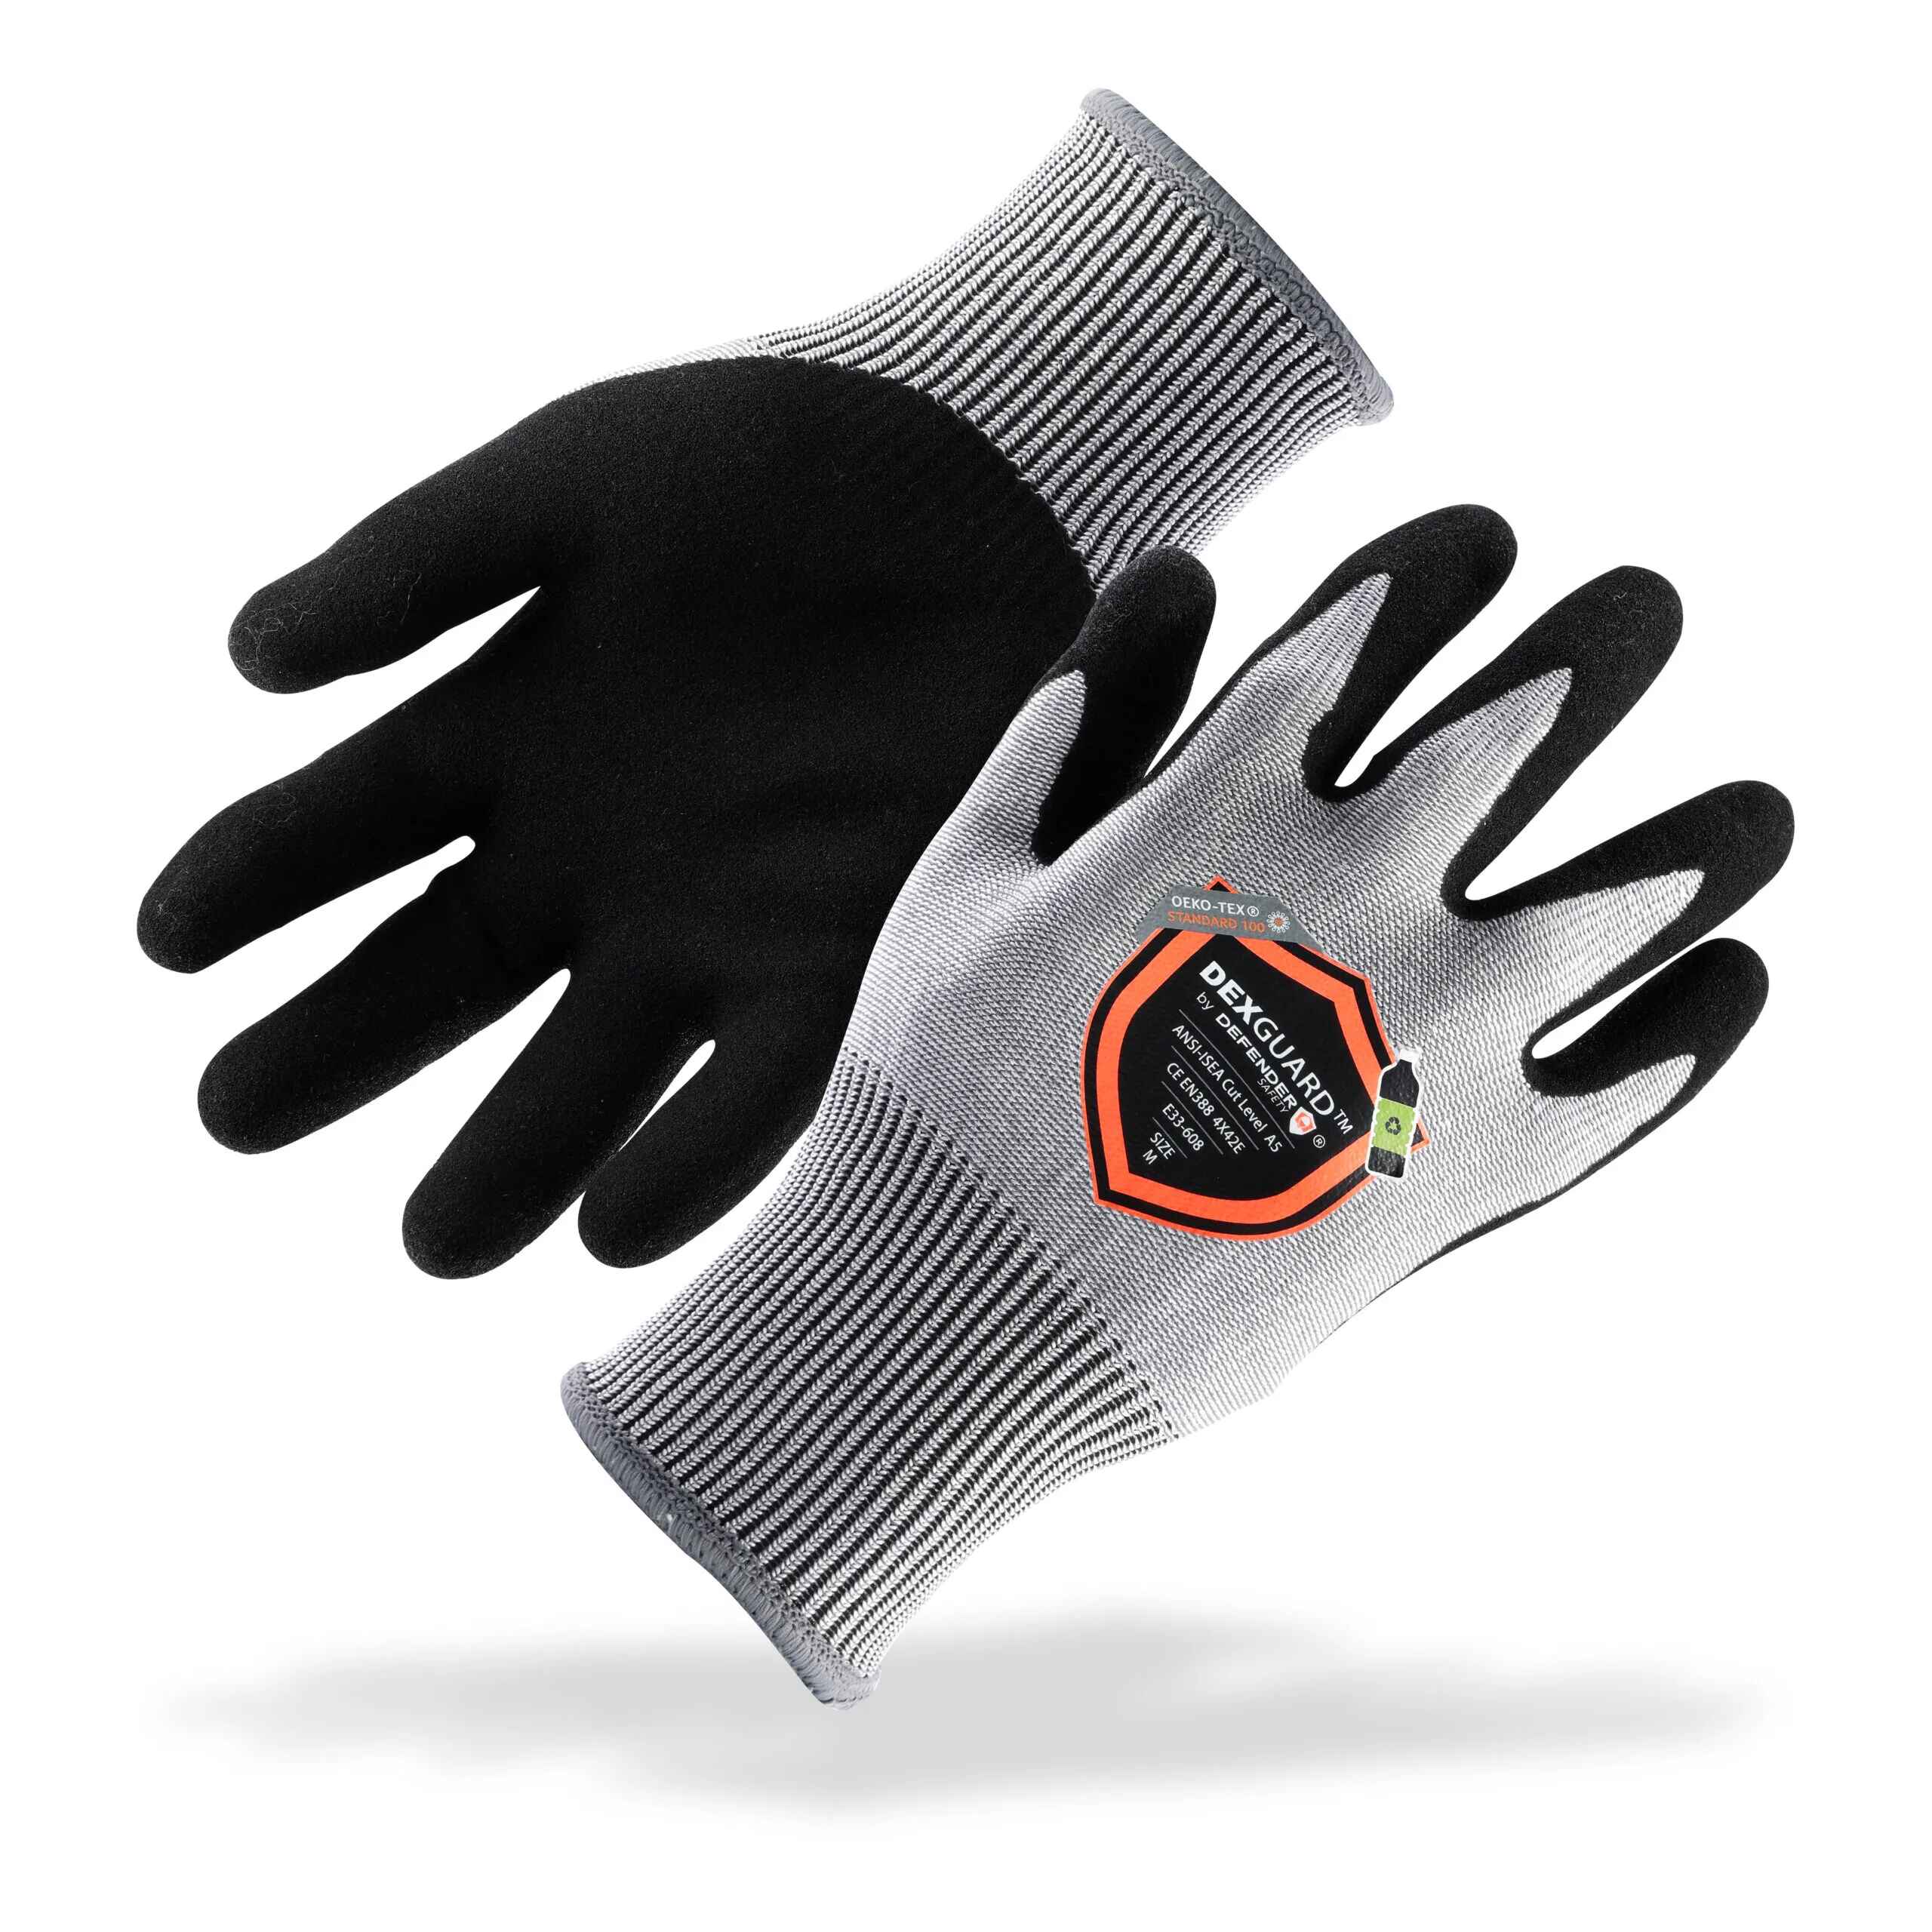 https://defendersafety.com/cdn/shop/products/dexguard-a5-cut-gloves-cold-weather-thermal-liner-water-resistant-level-4-abrasion-resistant-latex-coated-231484.jpg?v=1690825176&width=2560